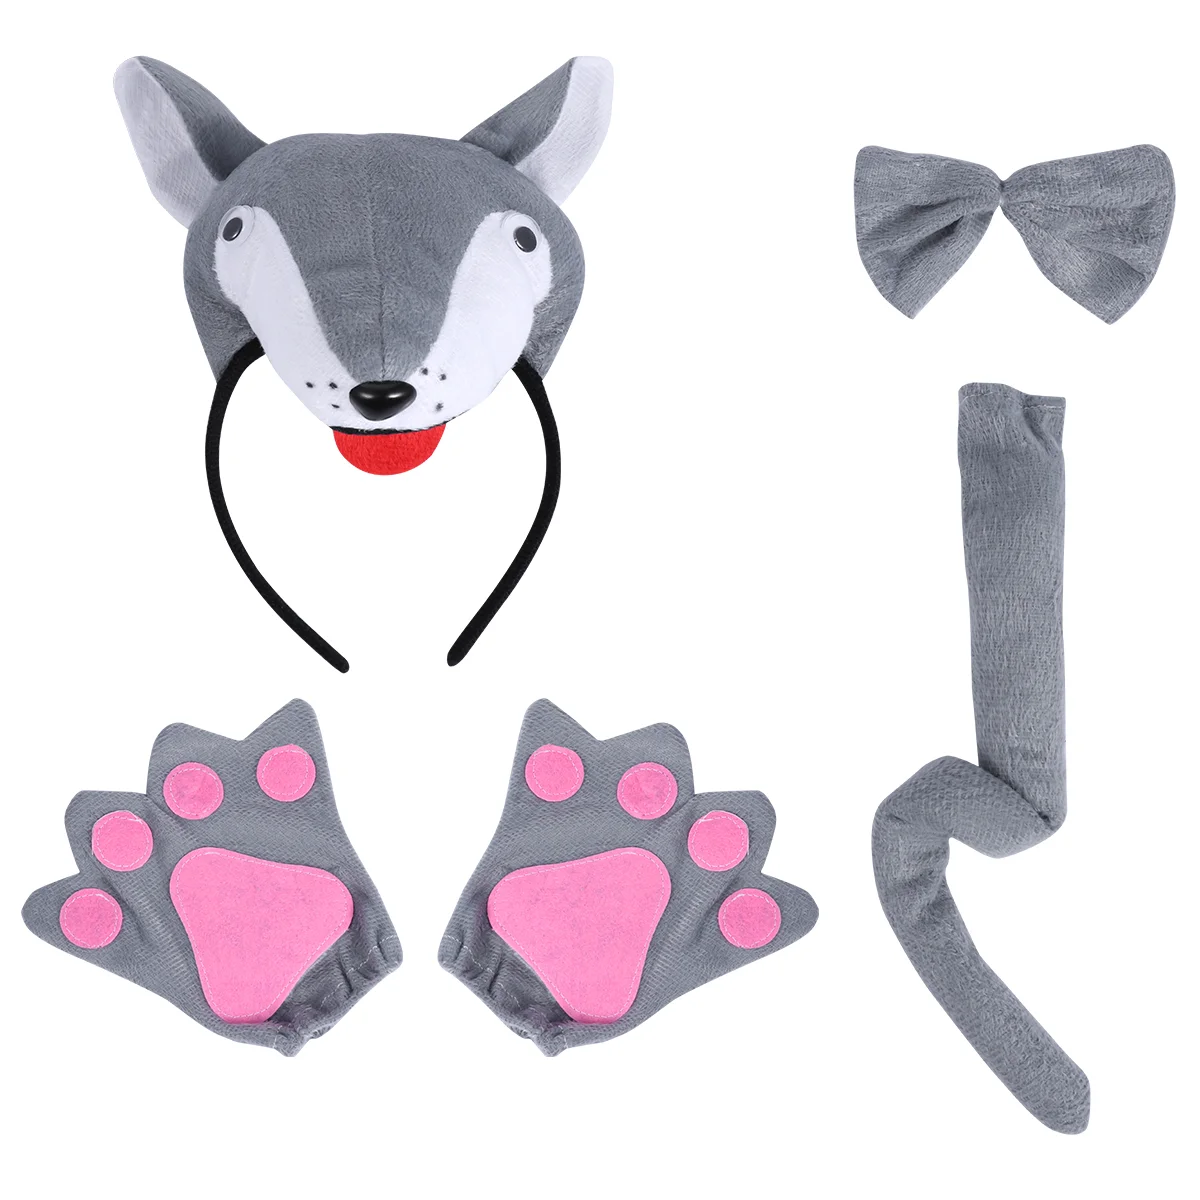 

PRETYZOOM 1 Set Children Cartoon Costume Suit Headband Bow Tie Tail Gloves Set Performance Props for Cosplay Party (3D Wolf)